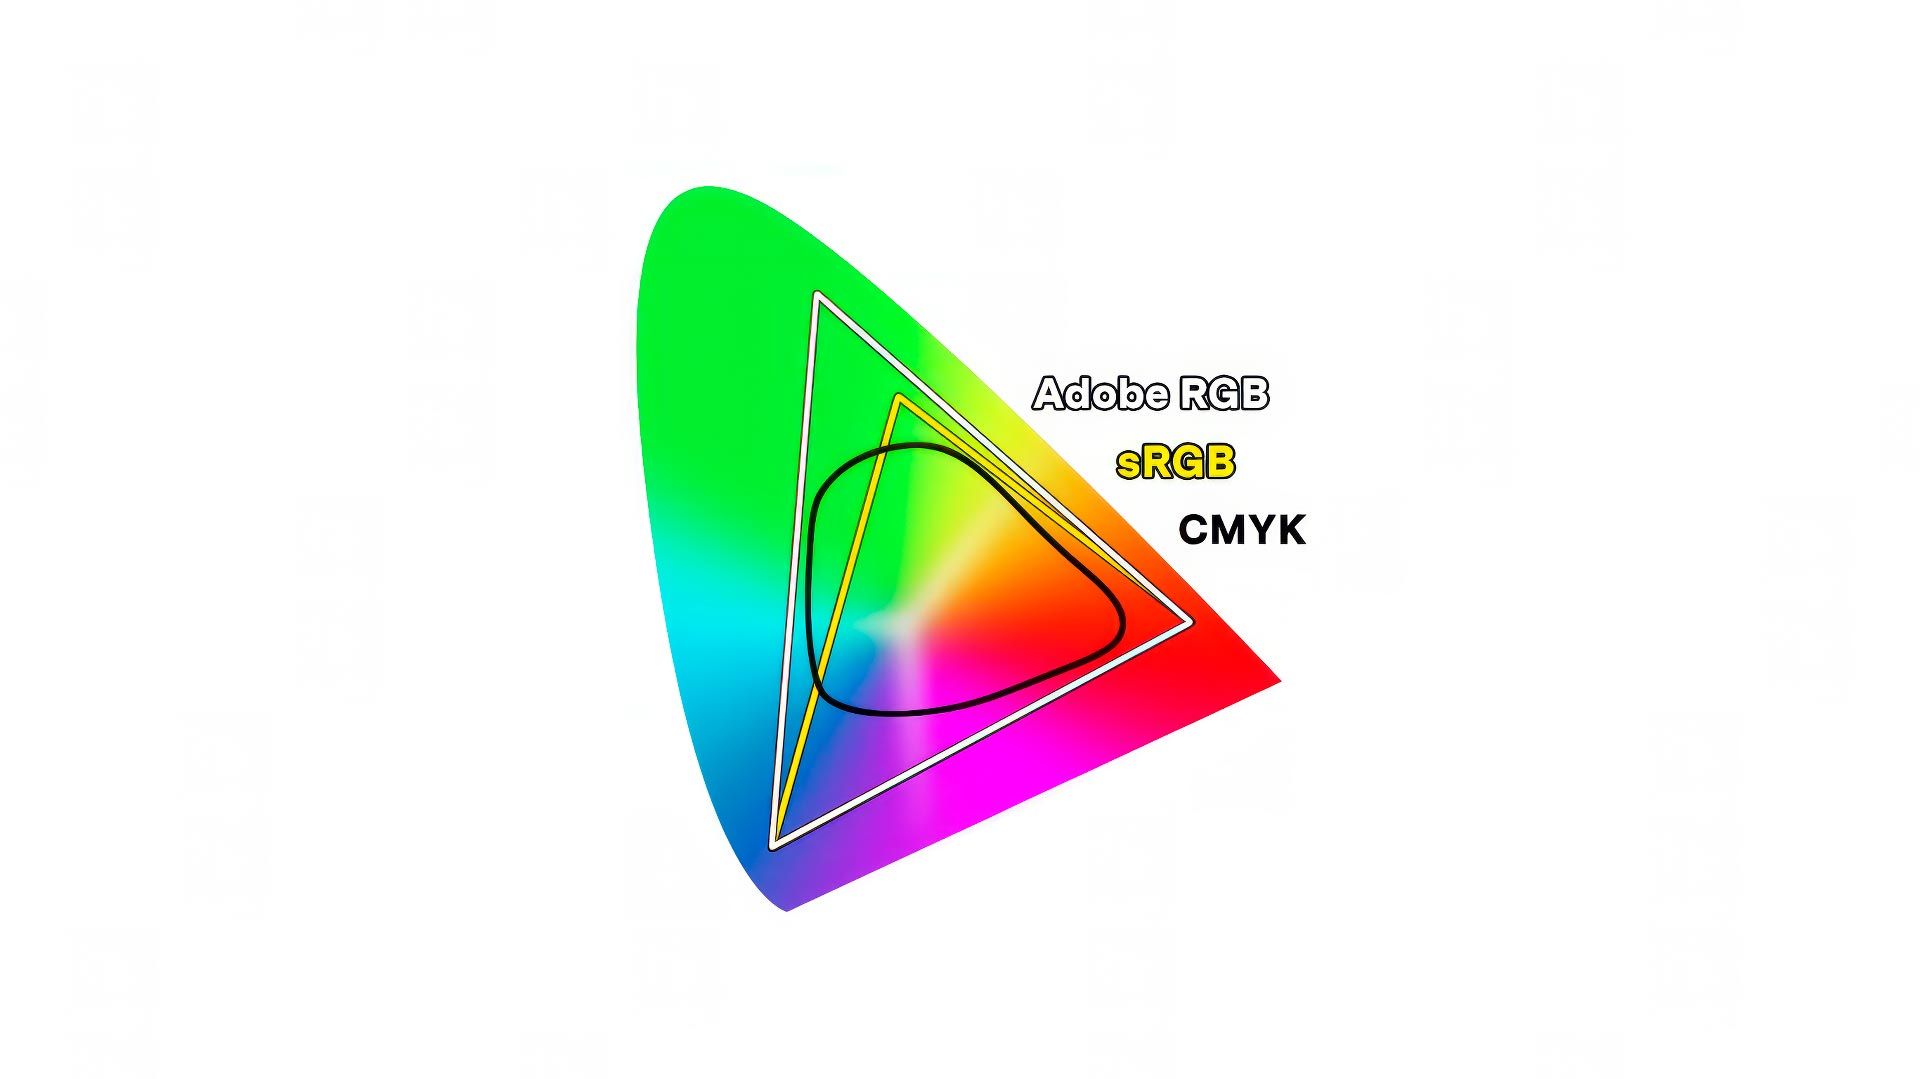 CIE chromaticity spectrum with sRGB, Adobe RGB and CMYK color gamuts